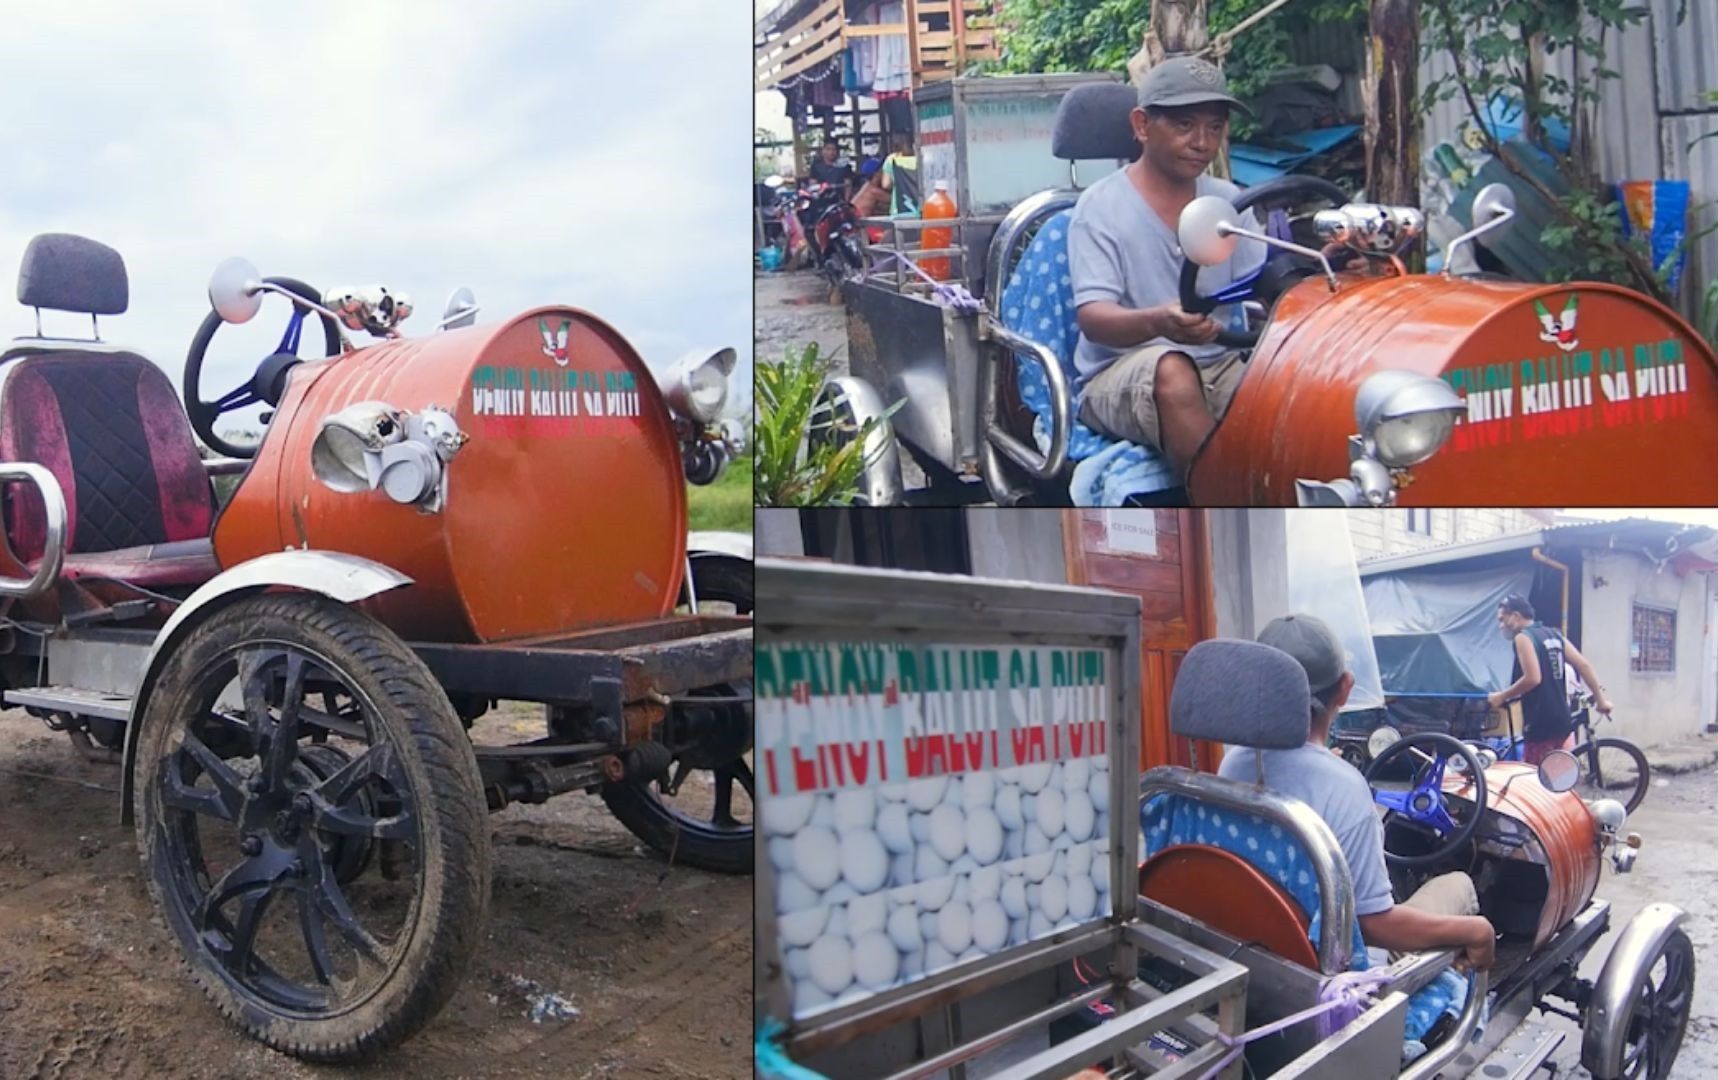 Balut vendor boosts income by selling 'drum cars' made of recycled materials